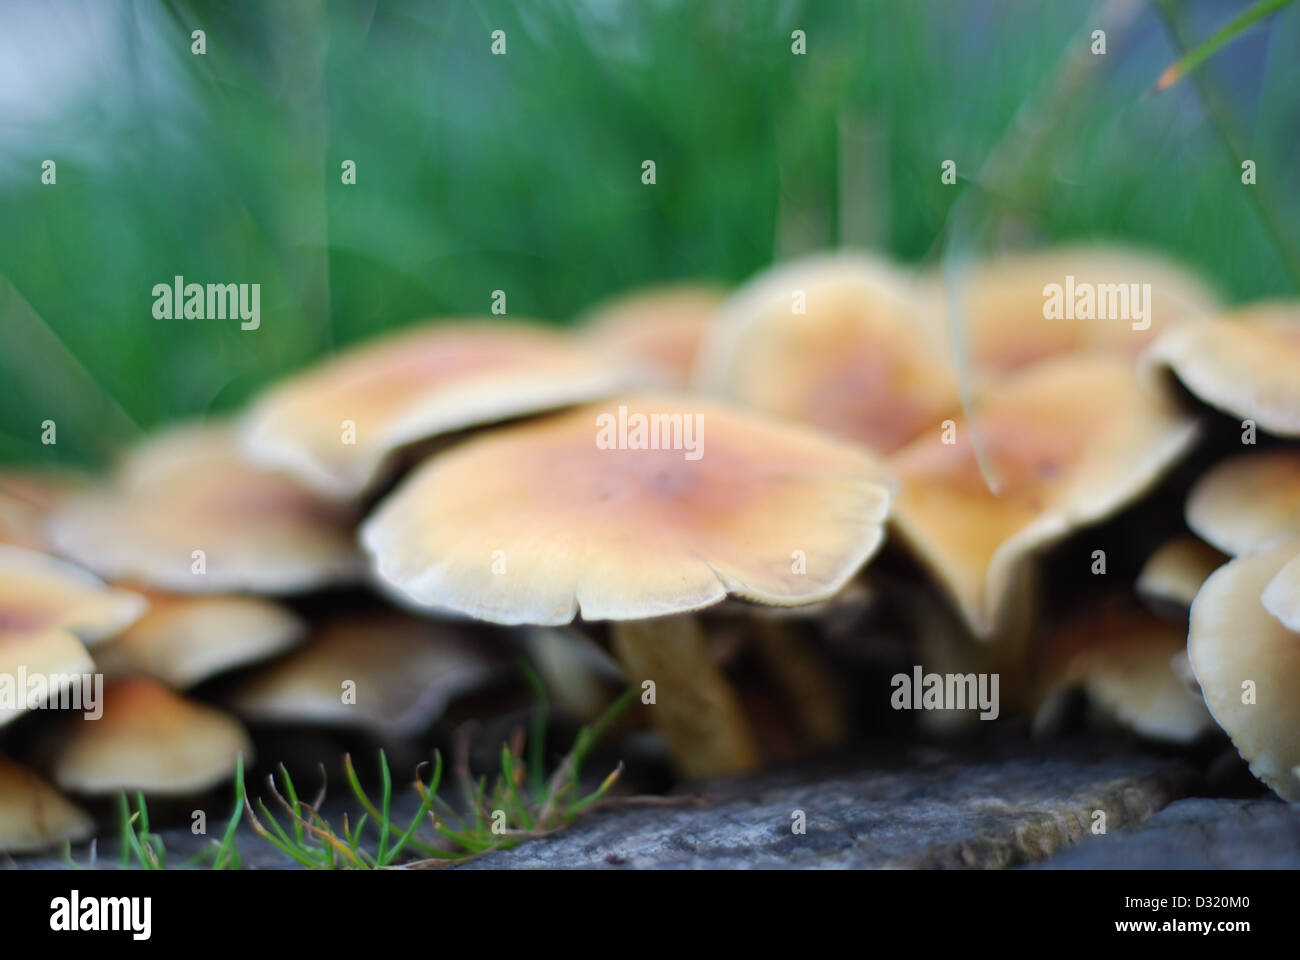 Close up artistic image of a cluster of small mushrooms and fungi around a cut tree stump on grass with shallow depth of field Stock Photo